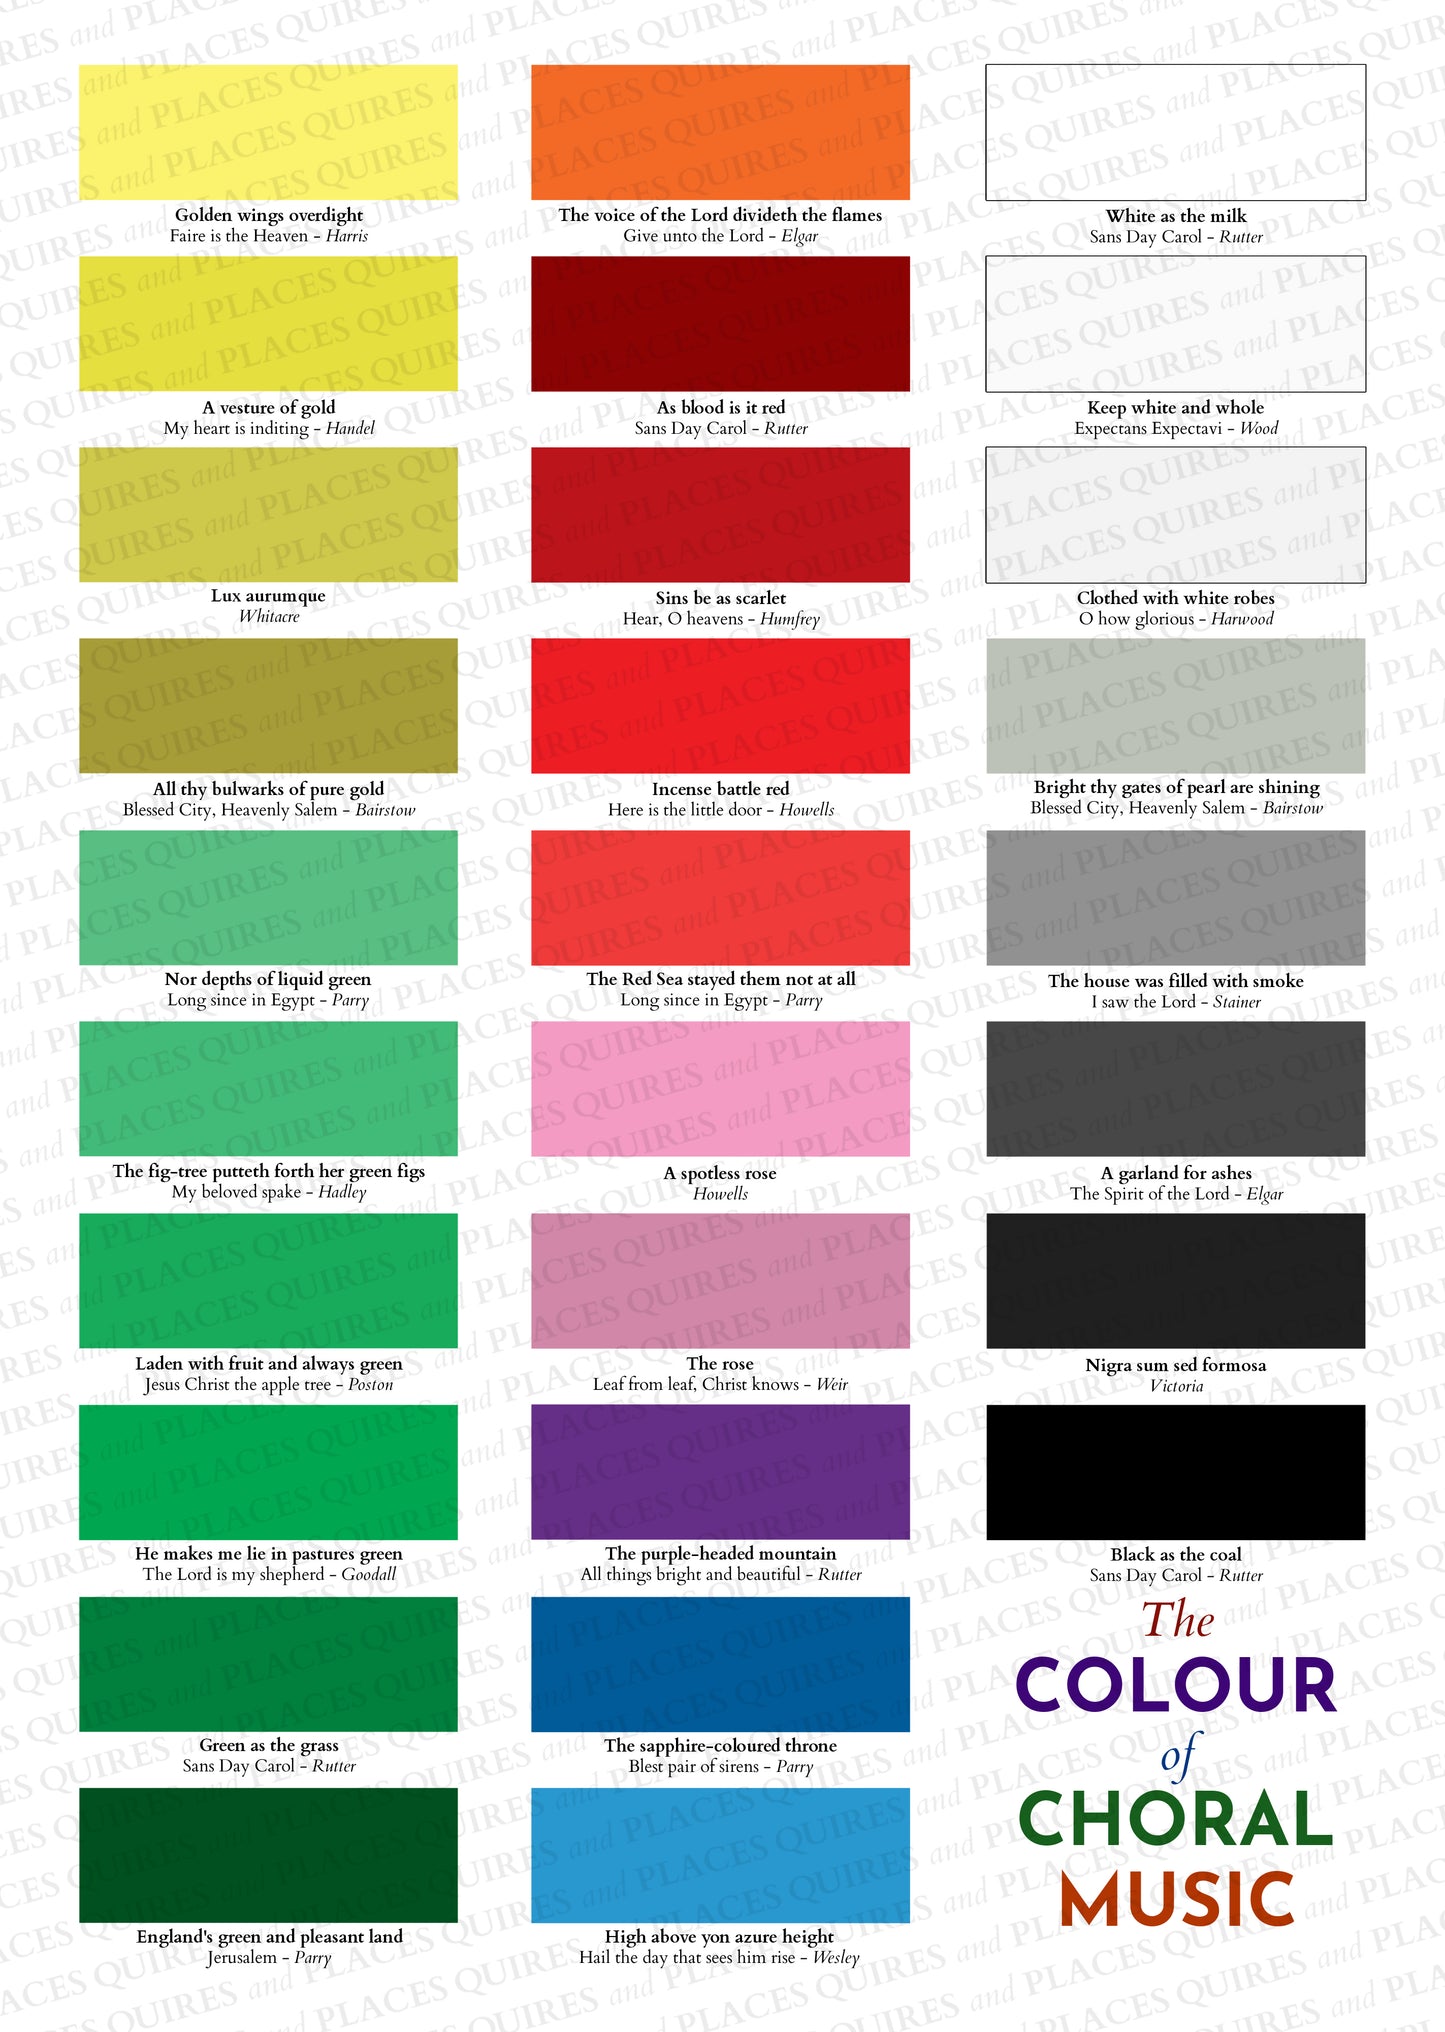 The Colour of Choral Music Poster